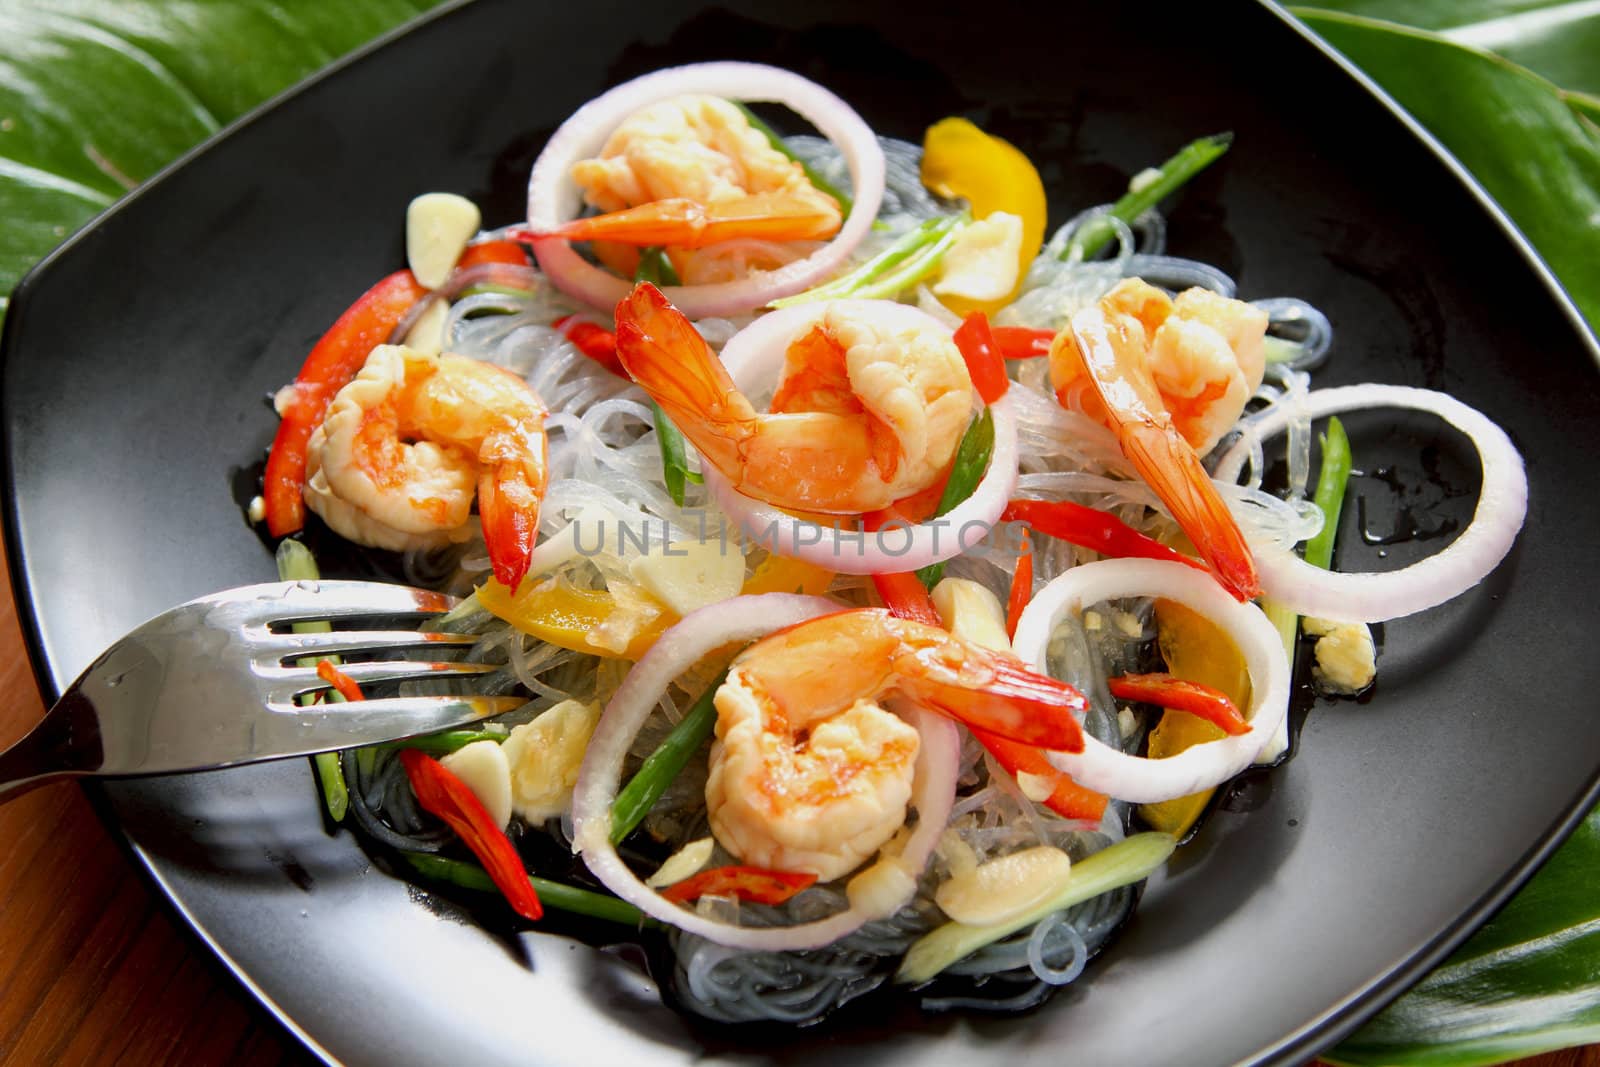 Sour & spicy vermicelli salad with prawn by vanillaechoes